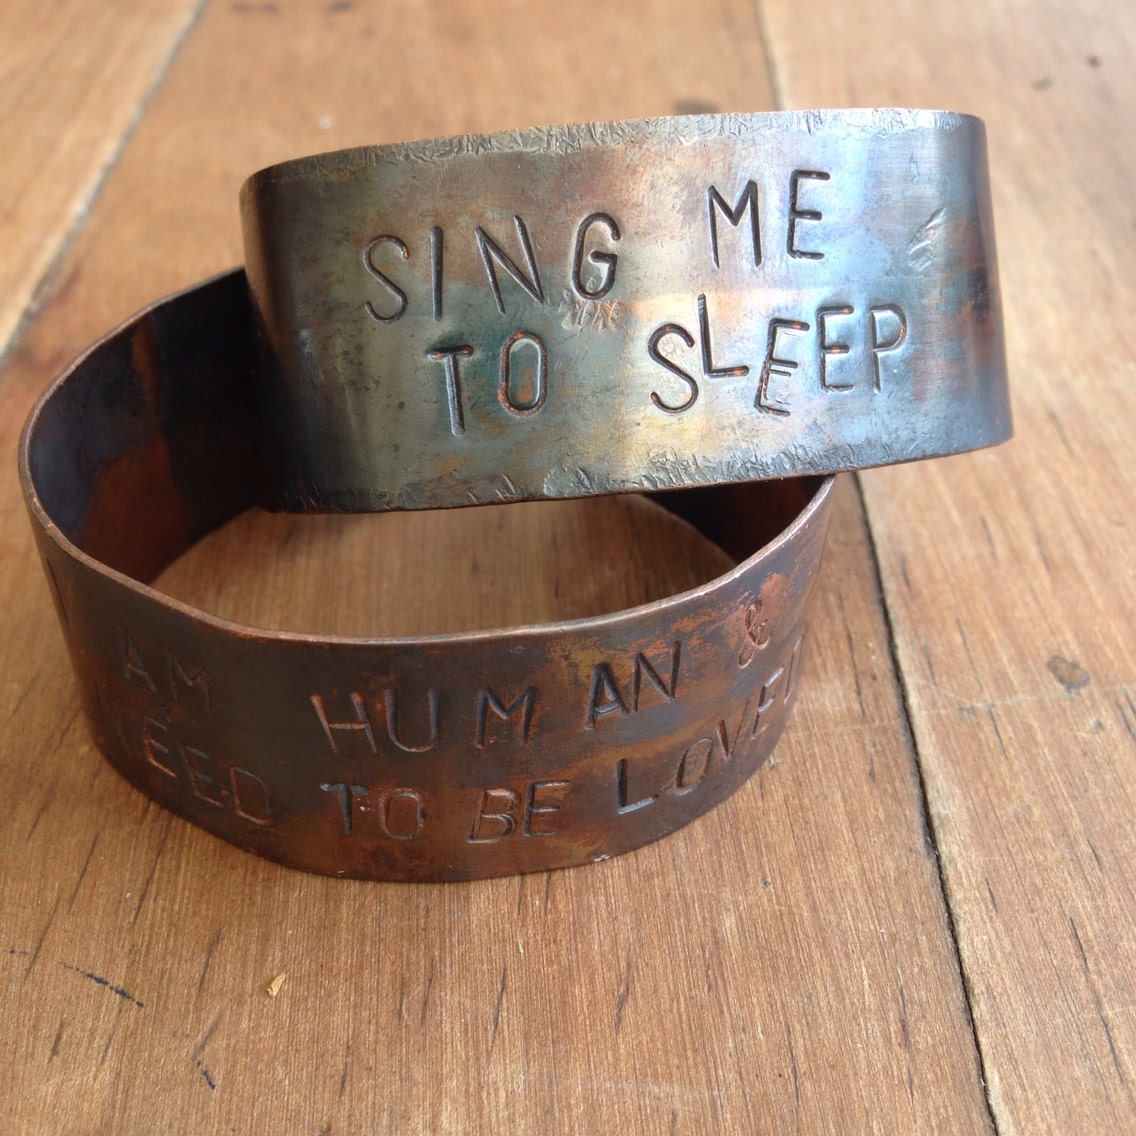 Vintage Copper Cuff - The Smiths, Sing Me To Sleep - jewelsandmud